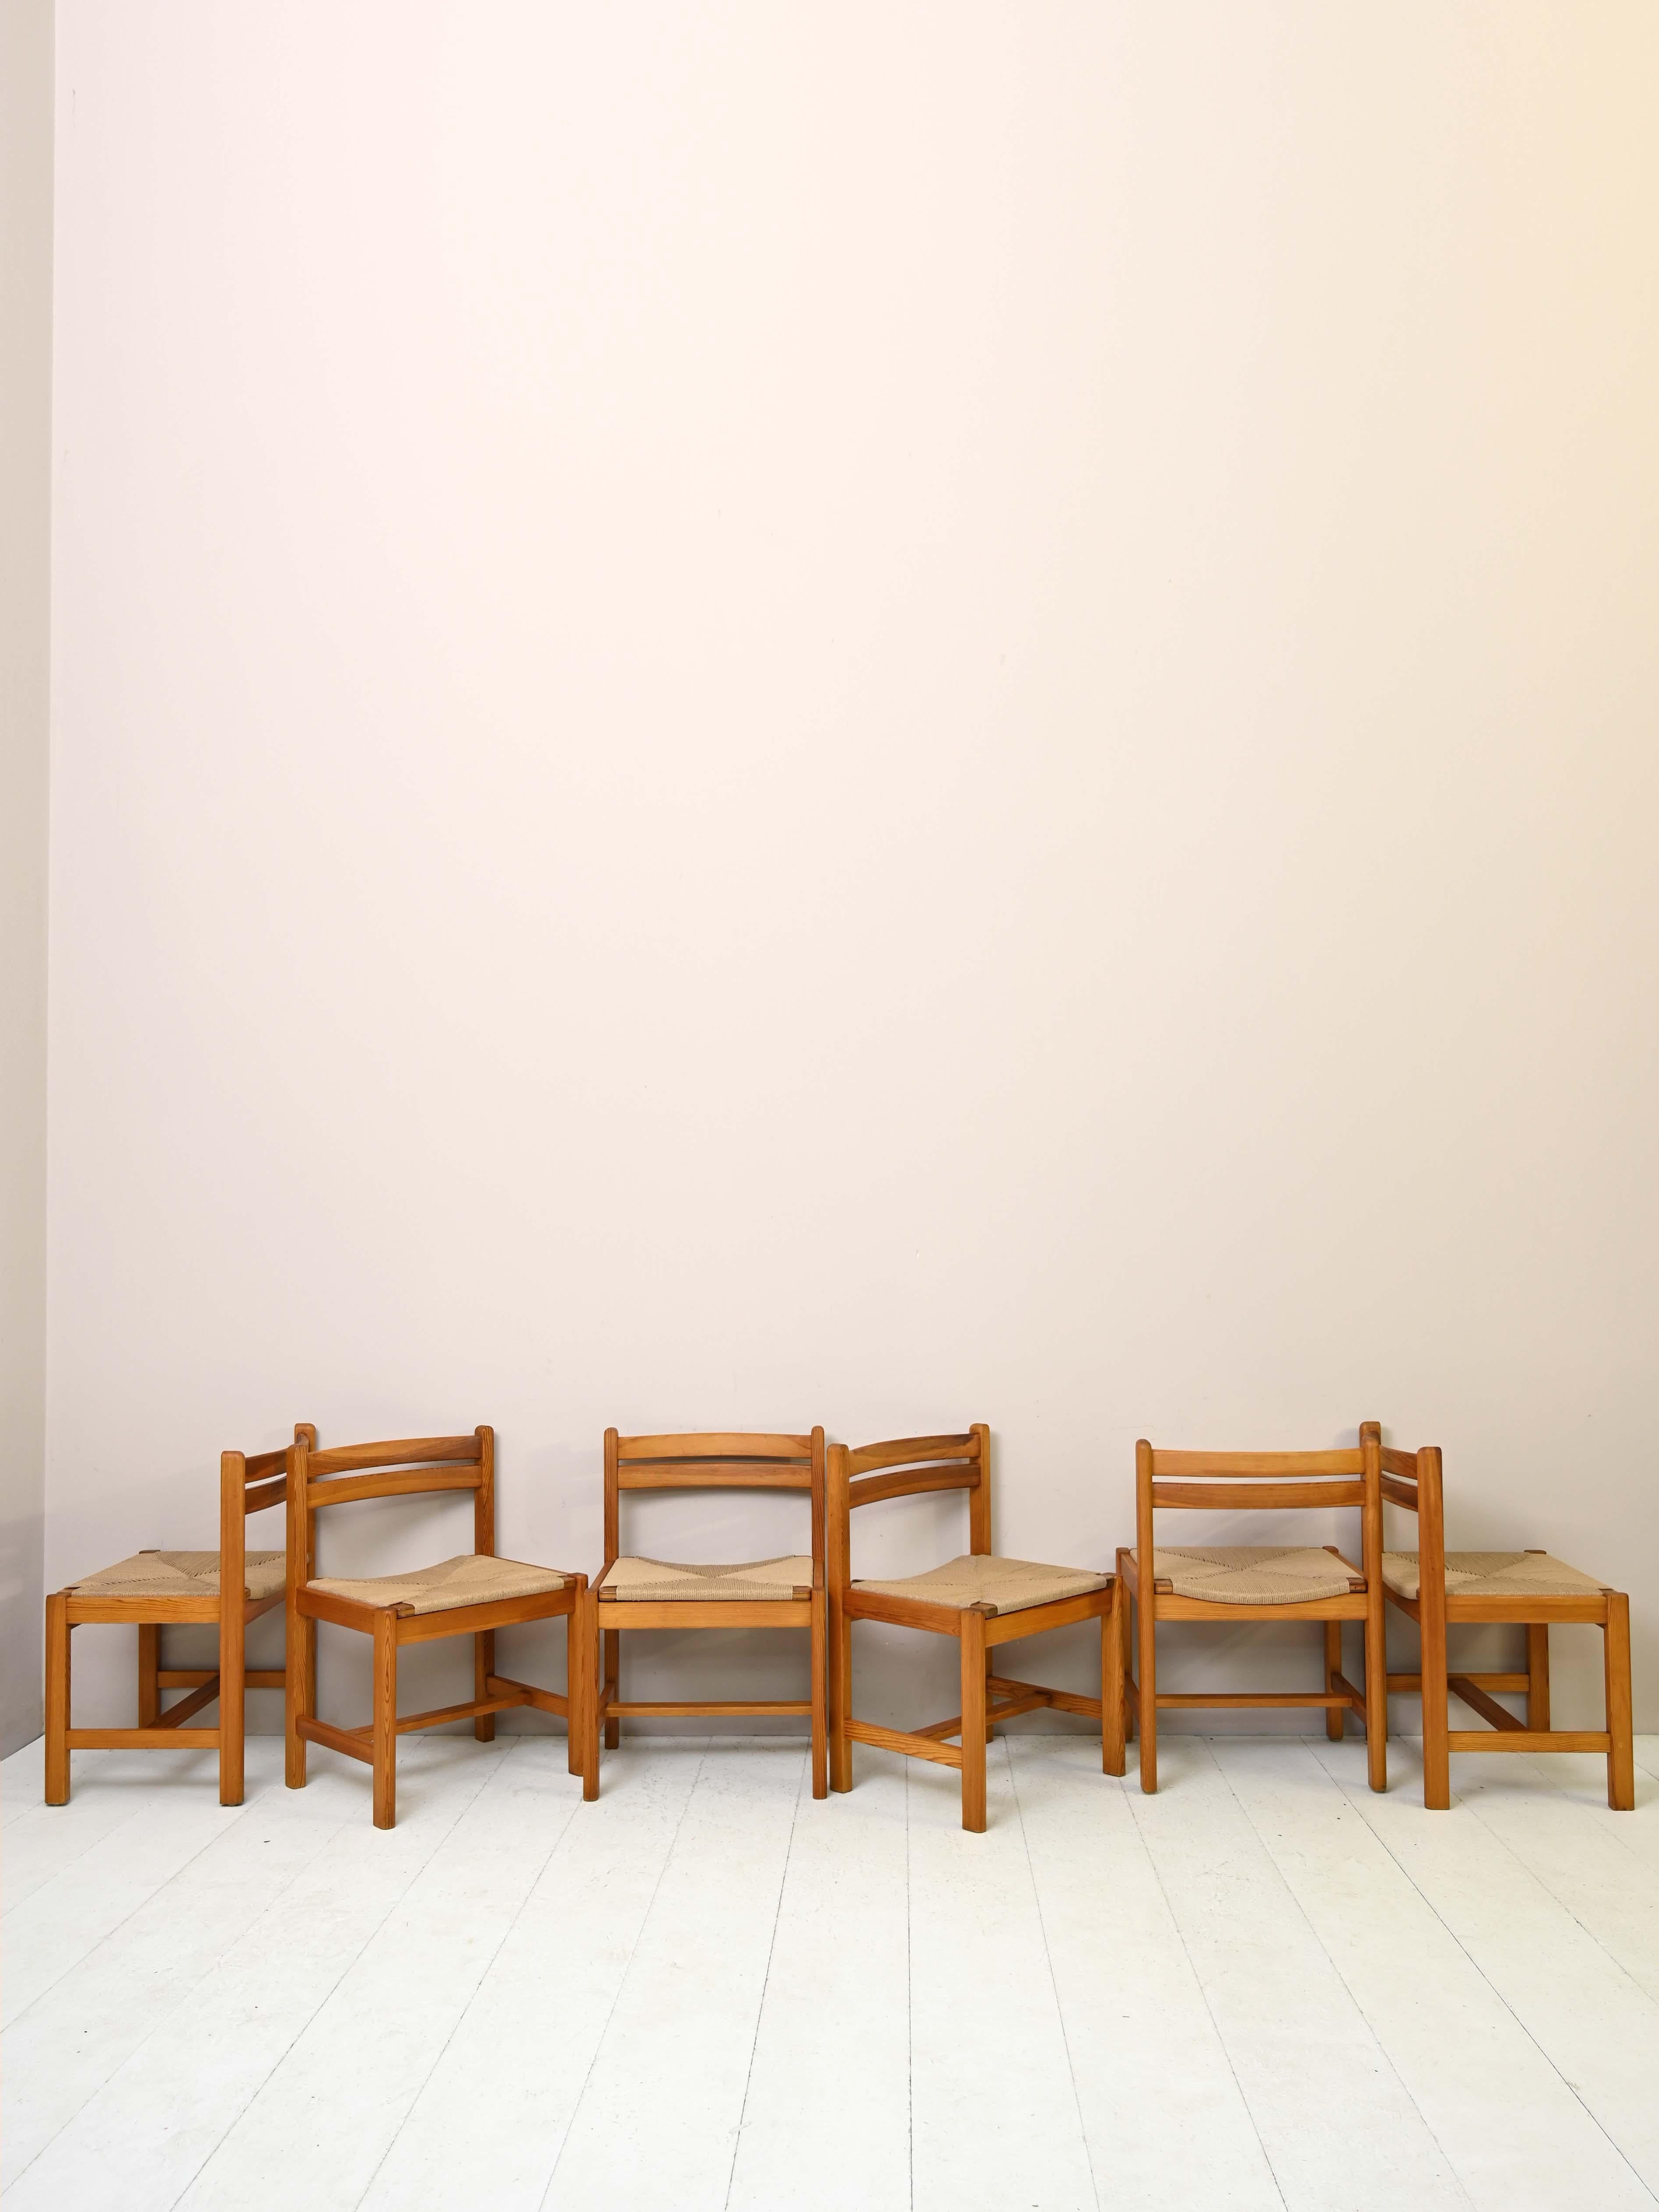 Scandinavian Swedish chairs from the 1960s.

Six dining chairs, model 'Asserbo,' designed by Børge Mogensen and manufactured by Karl Andersson & Söner.
The frame is made of pine wood while the seat is made of original woven rope.
The distinctive